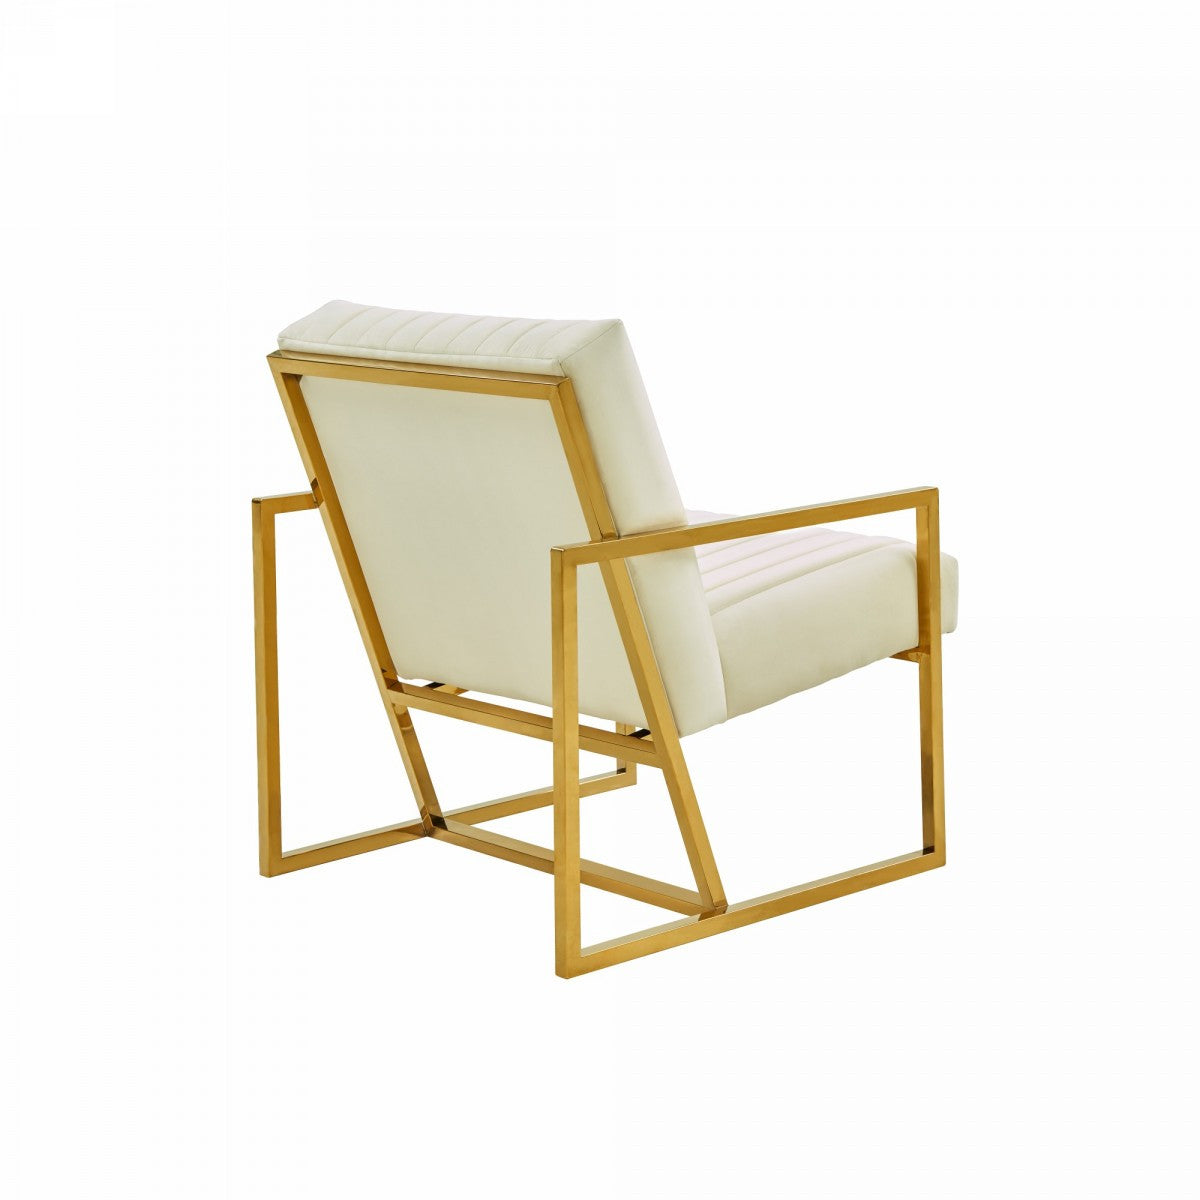 Divani Casa Baylor Modern Off-White Eco-Leather Accent Chair